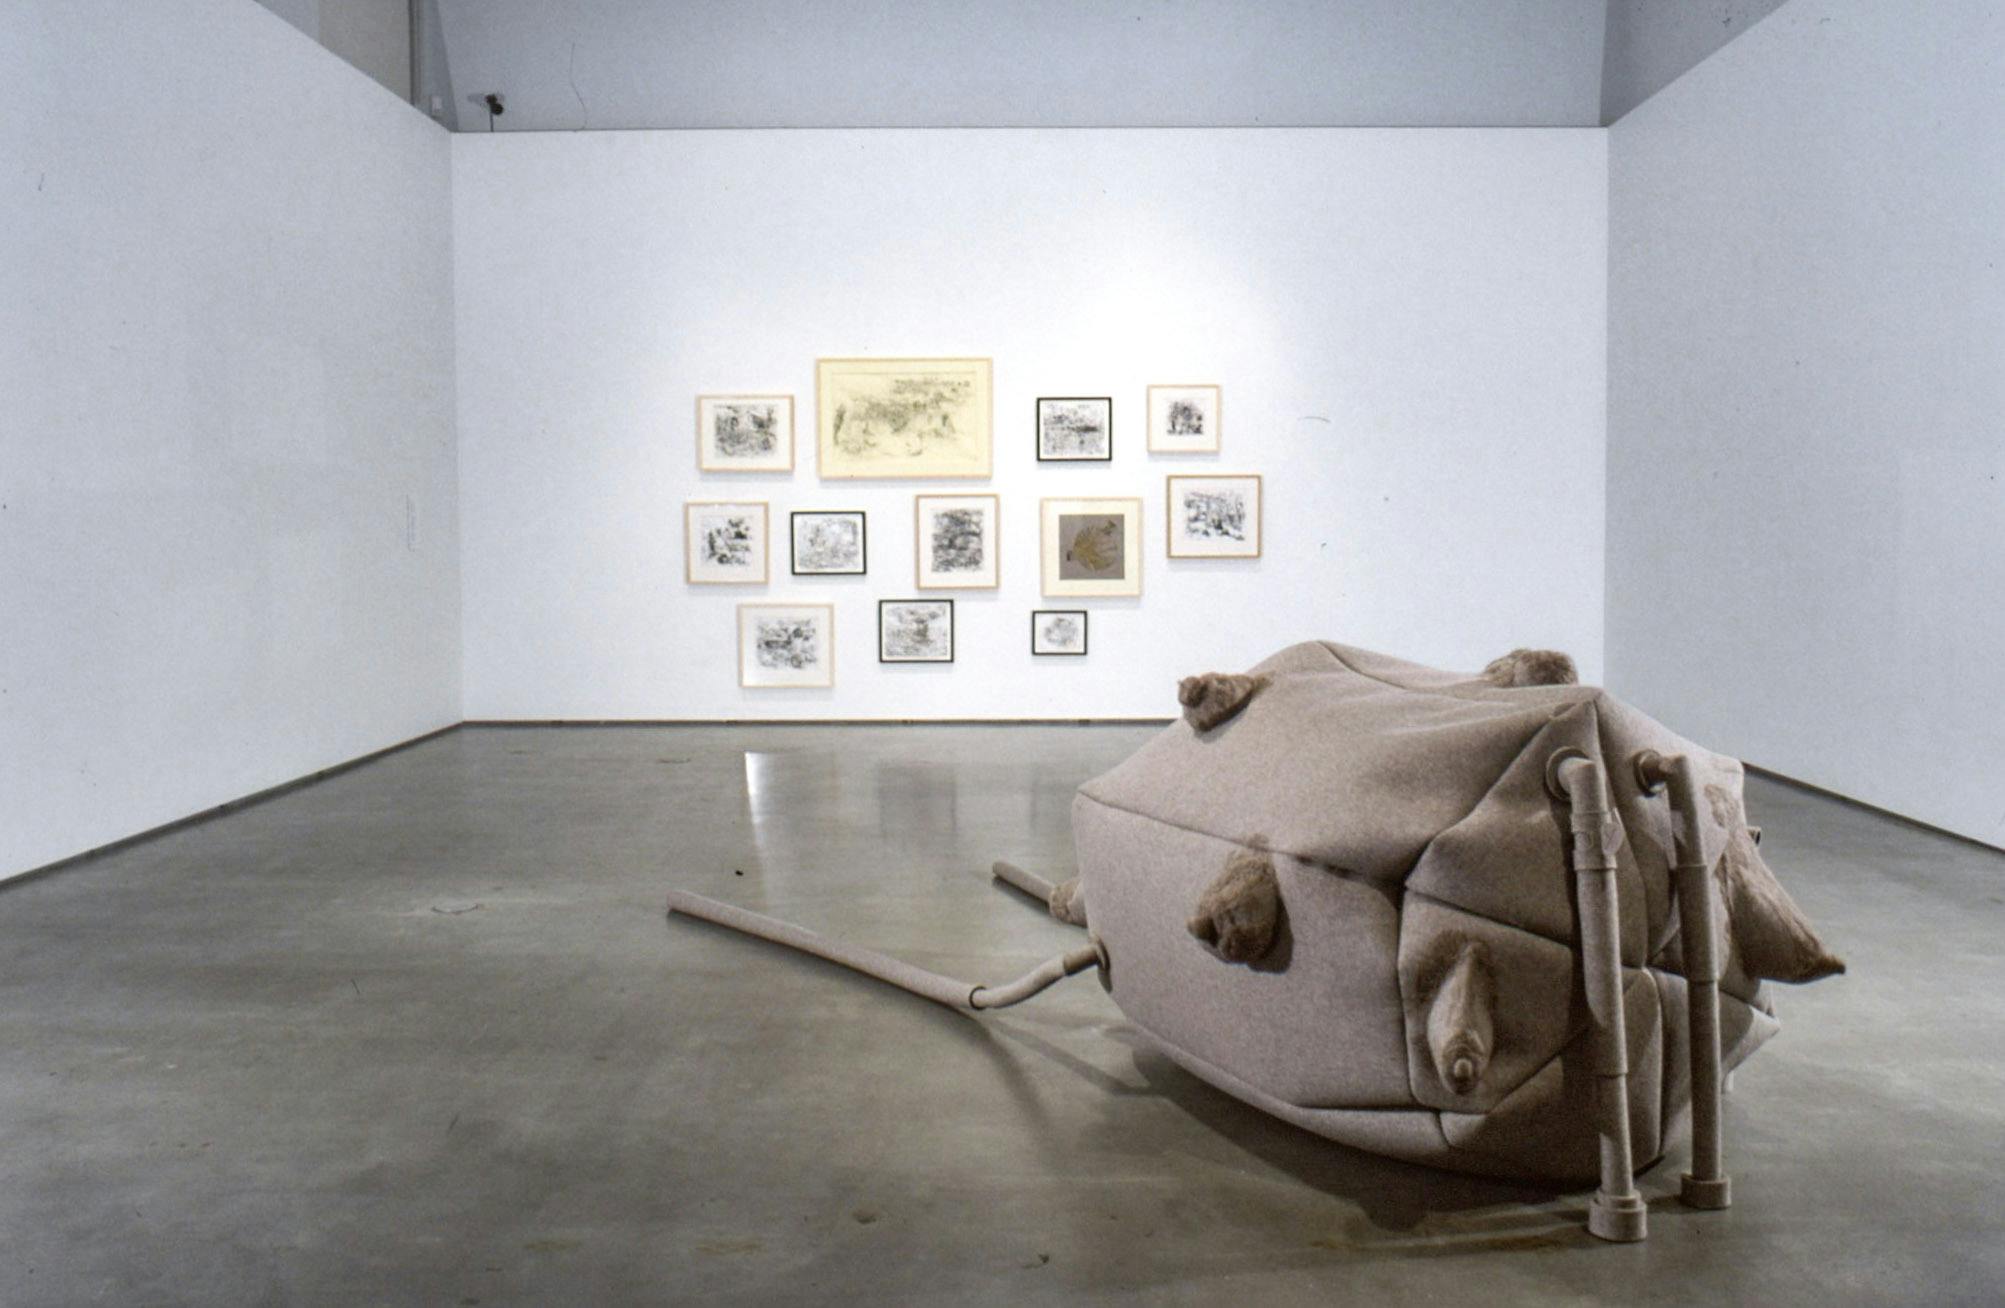 Installation image of Luanne Martineau’s art exhibition. A large soft sculptural installation is on the floor. It is made with brown fabric and has four legs. 12 framed illustrations are mounted on the back wall. 